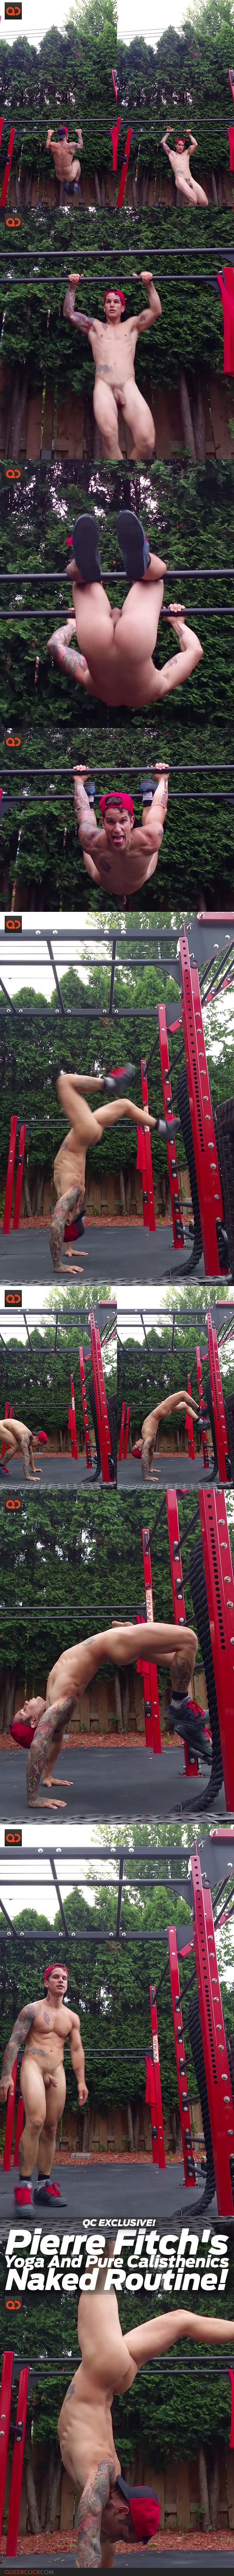 QC Exclusive: Pierre Fitch's Yoga And Pure Calisthenics Naked Routine!